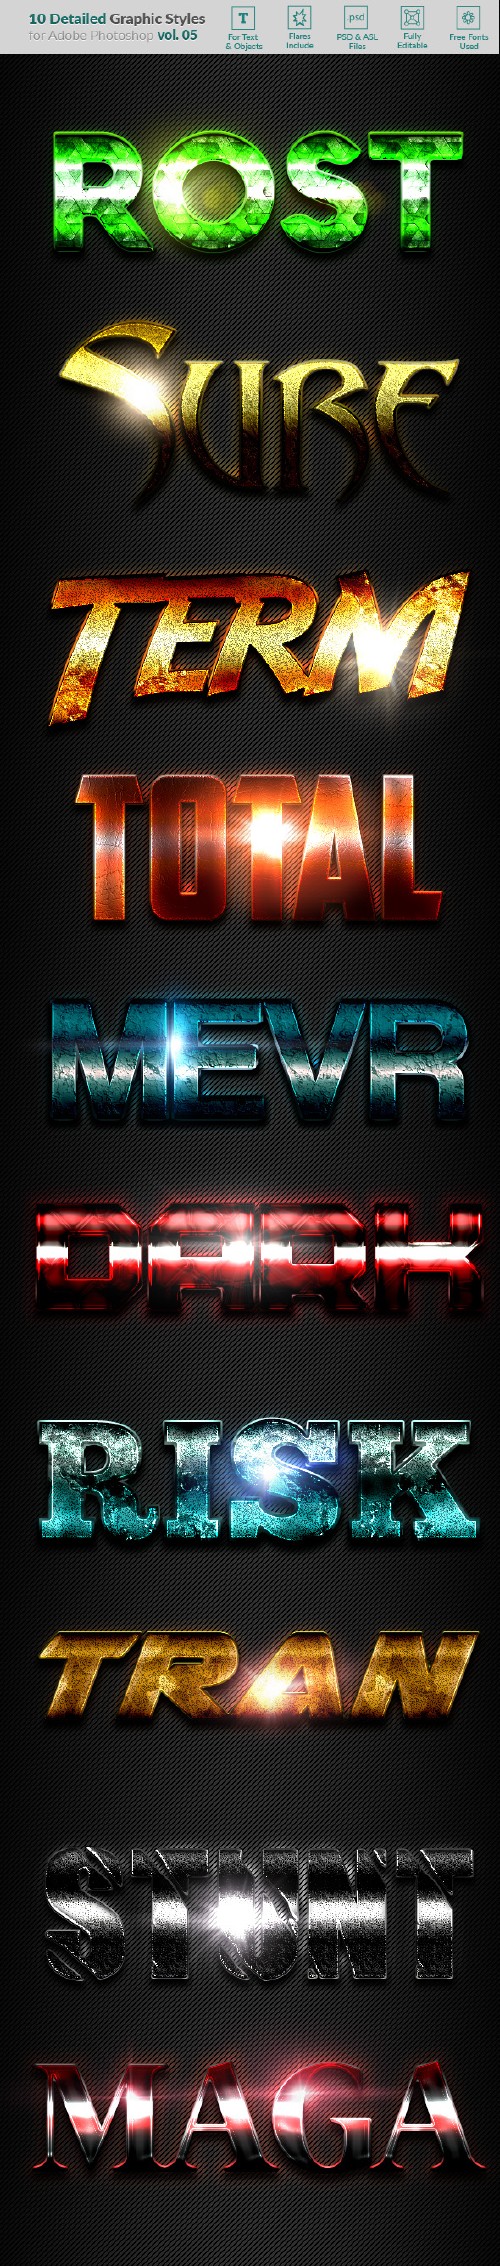 10 Text Effects Vol. 05 - 20001544